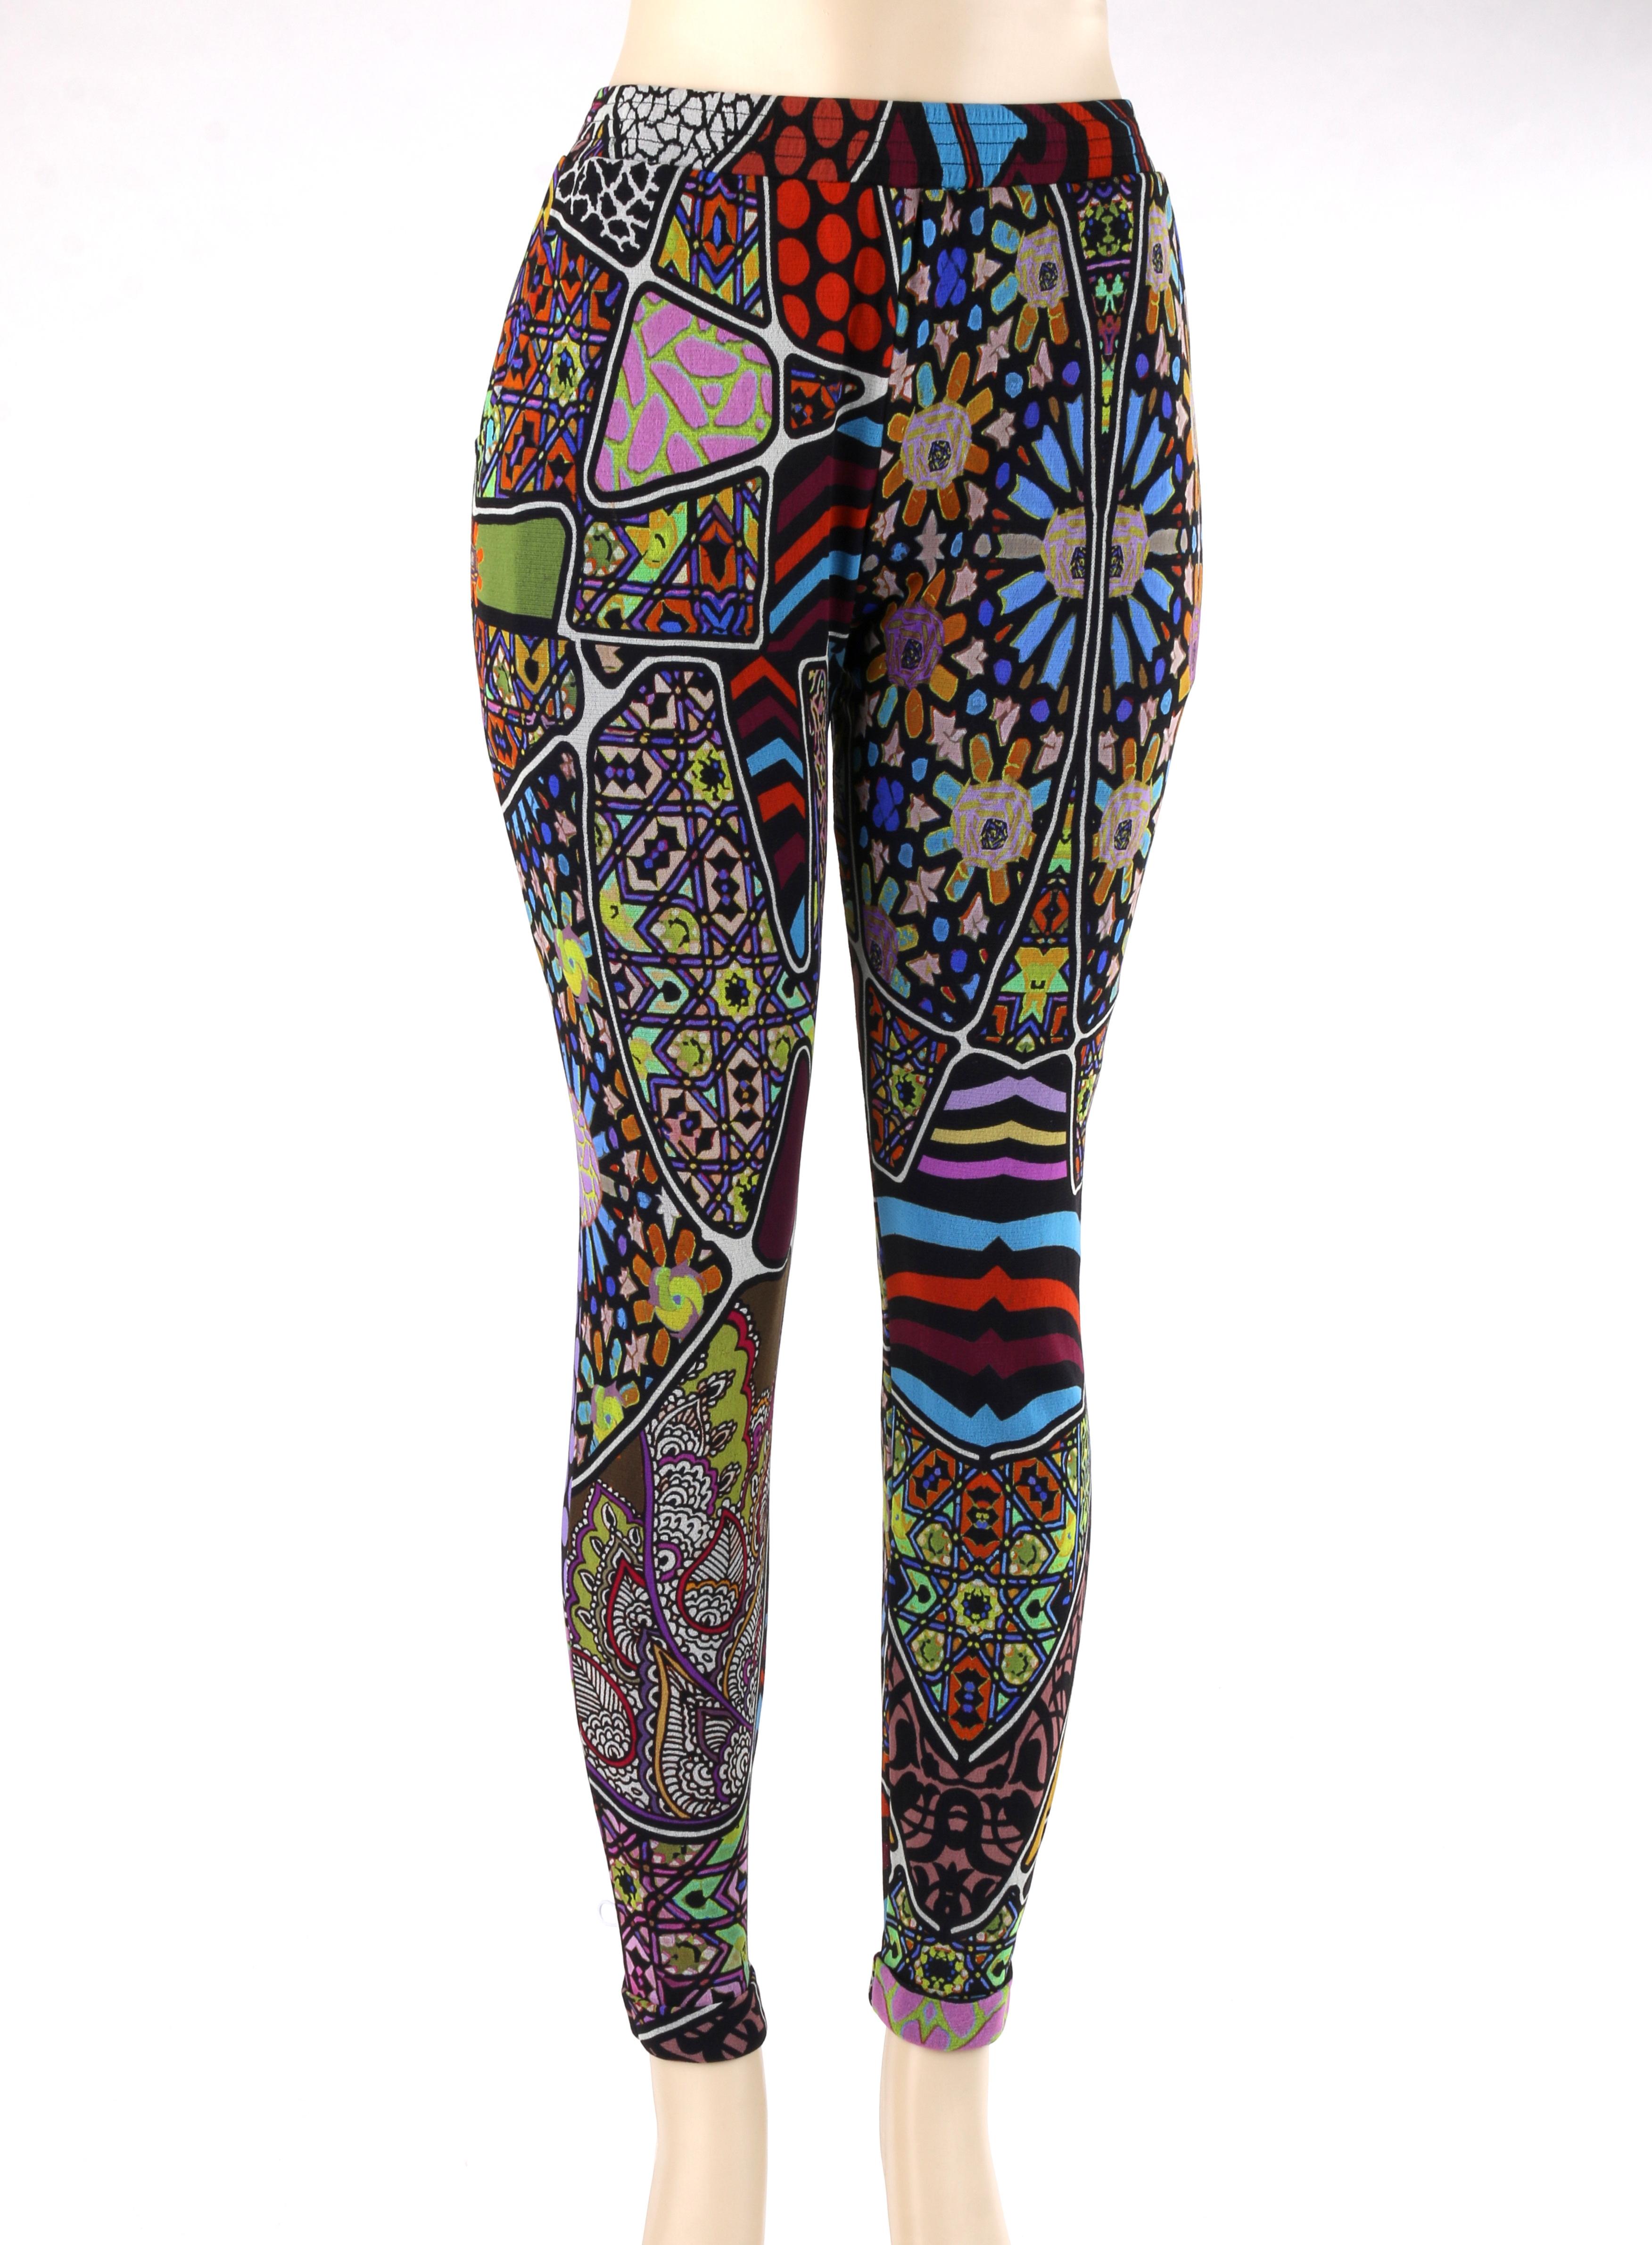 FUZZI Jean-Paul Gaultier c.2000's Multicolor Mixed Pattern Mesh Legging Pants
 
Brand / Manufacturer: Fuzzi
Designer: Jean Paul Gaultier
Style: Legging pants
Color(s): Shades of blue, purple, yellow, orange, green, brown, and red
Lined: Yes
Marked